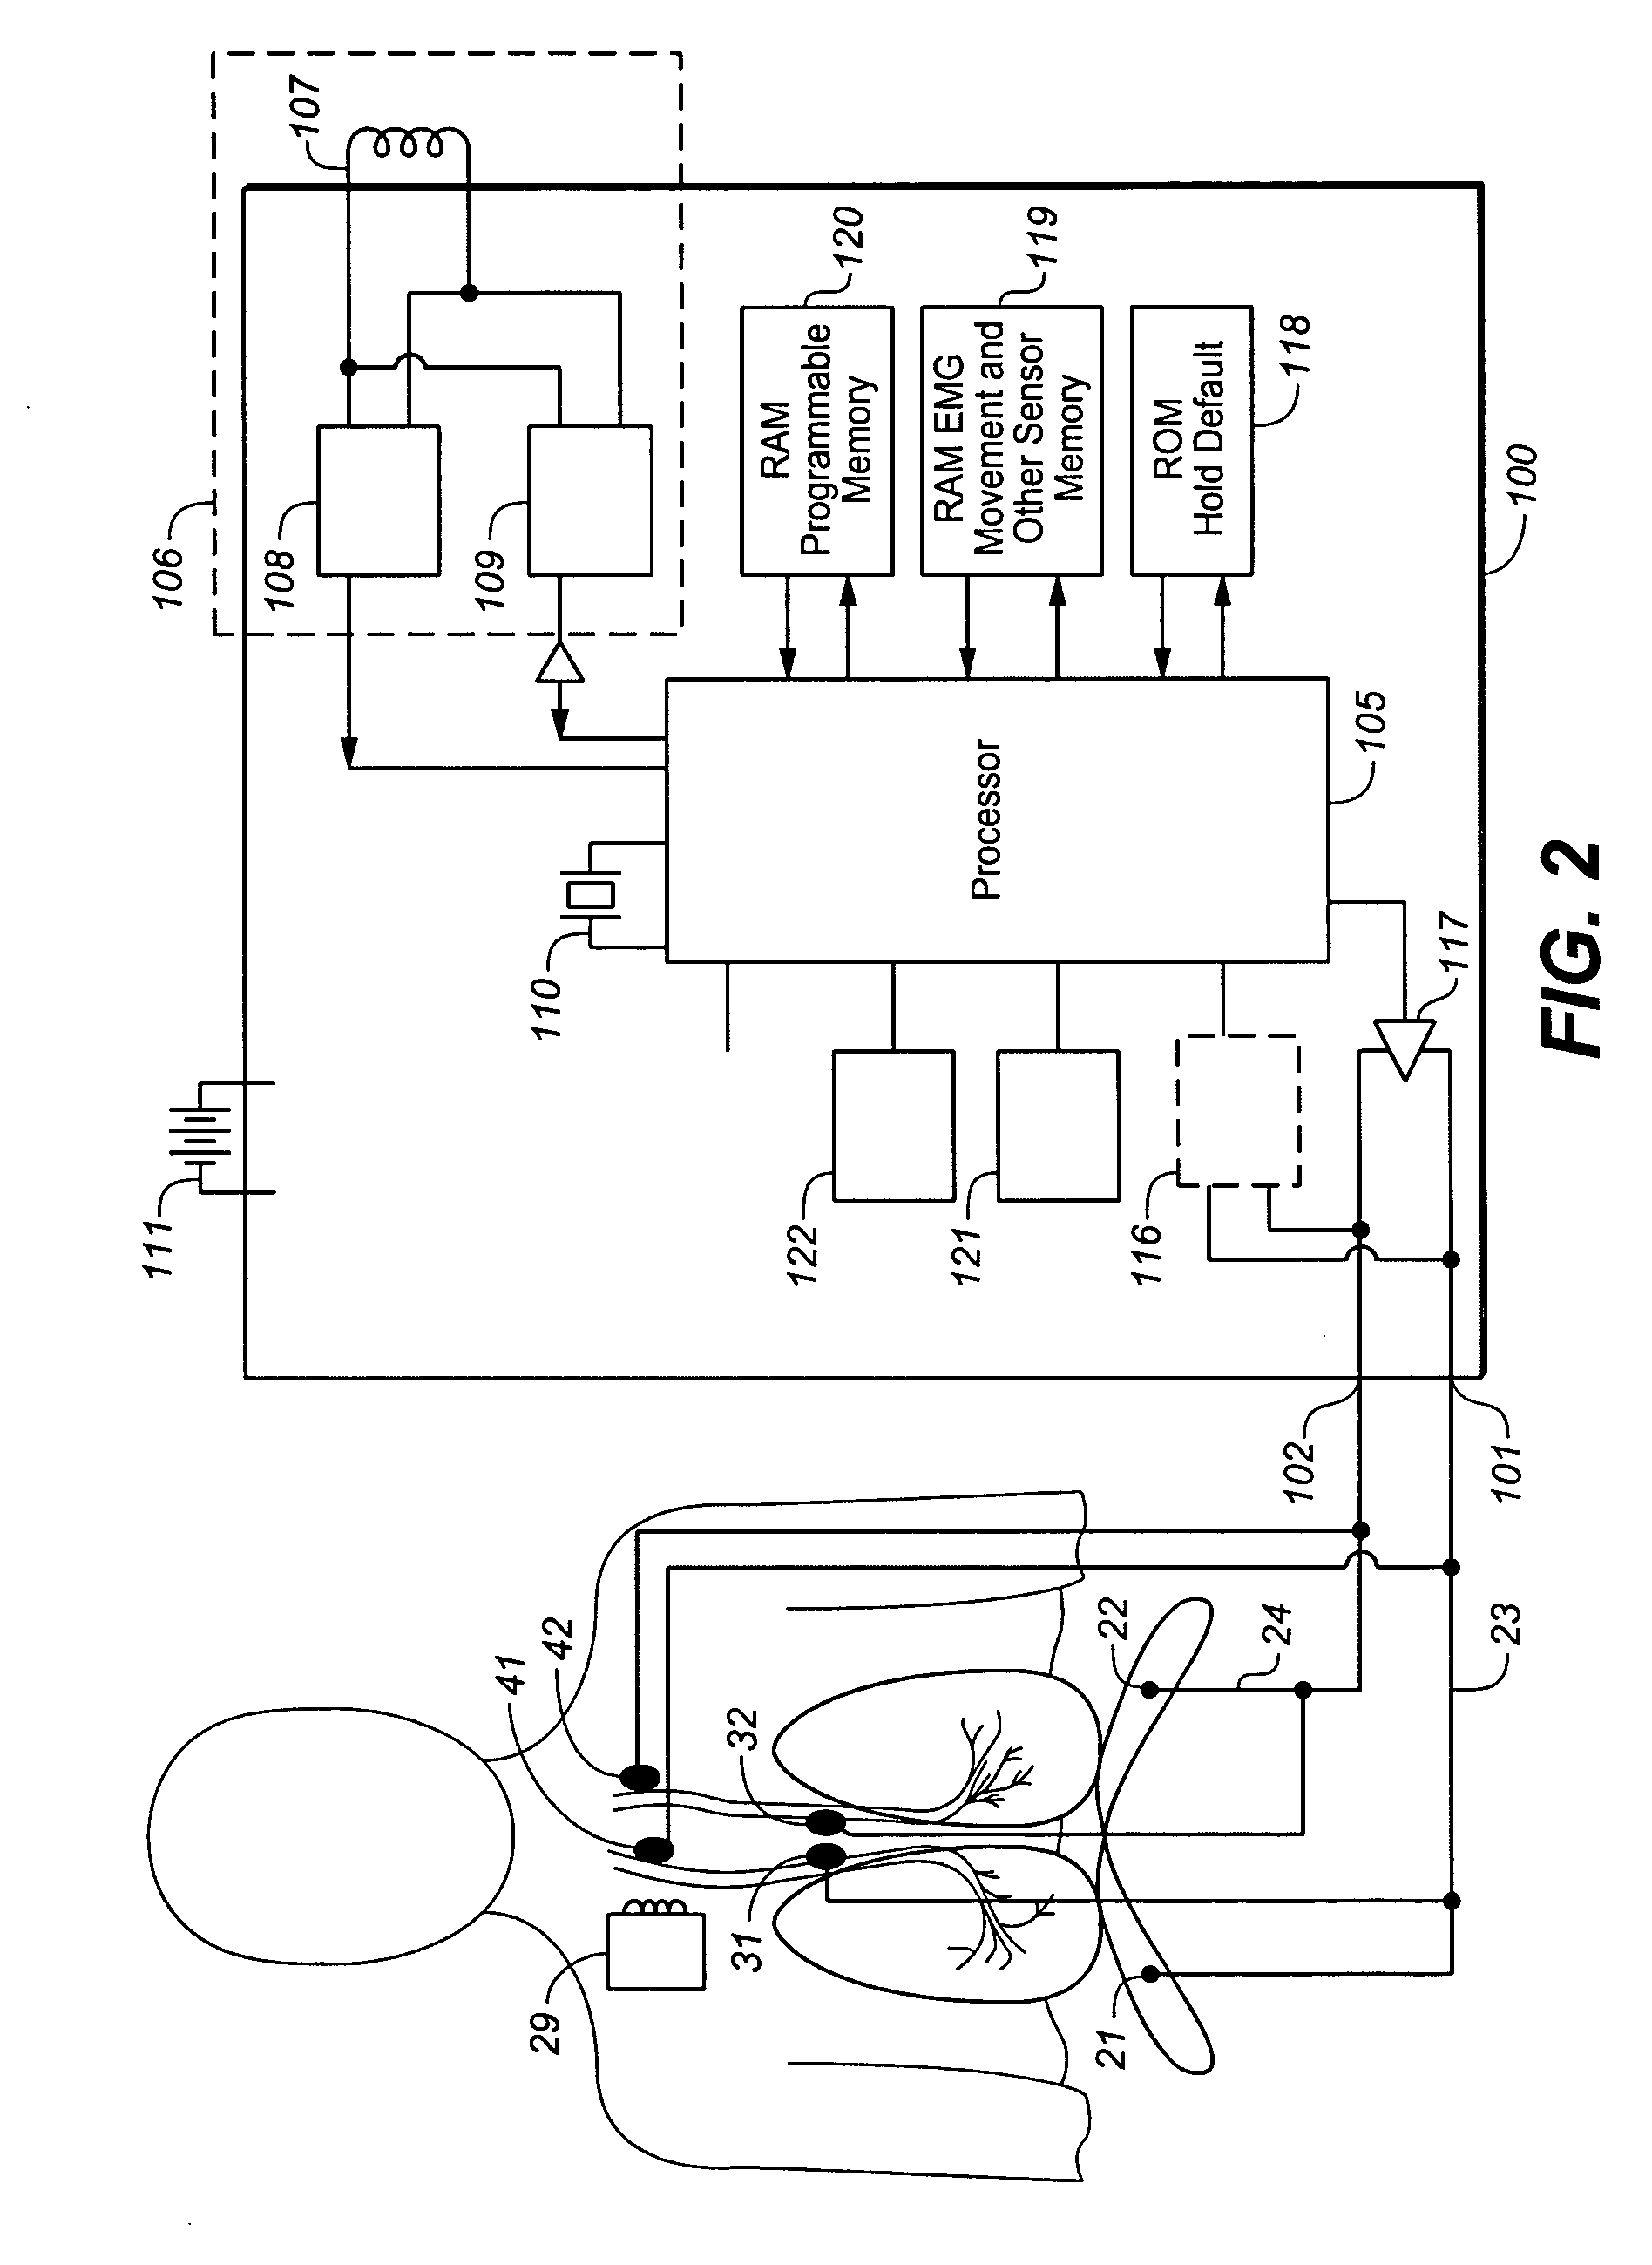 Device and method for biasing lung volume